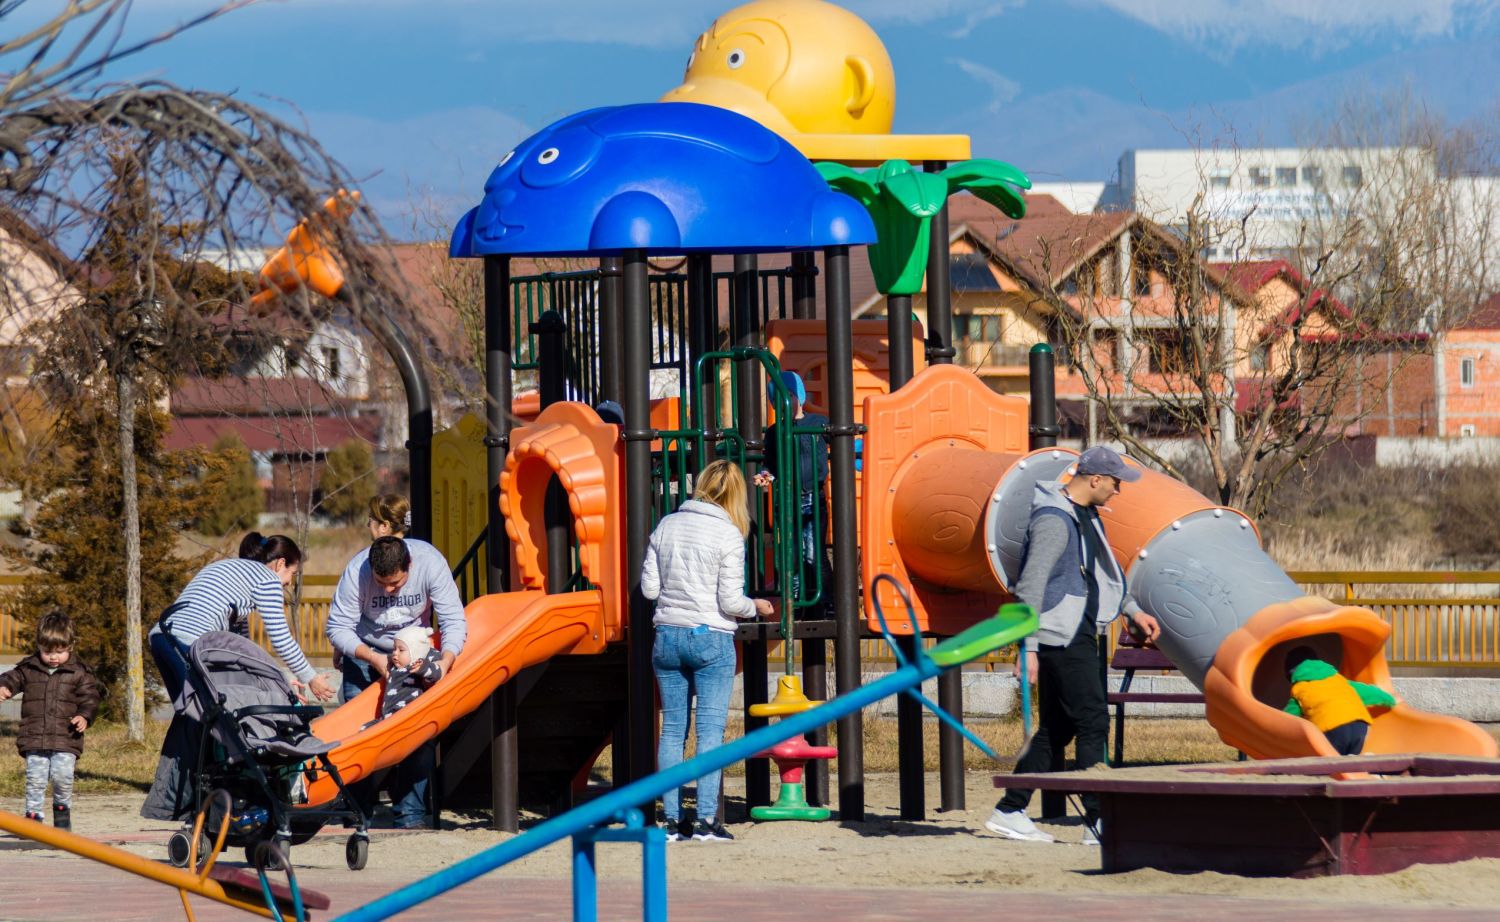 Children play and learn at a city playground.